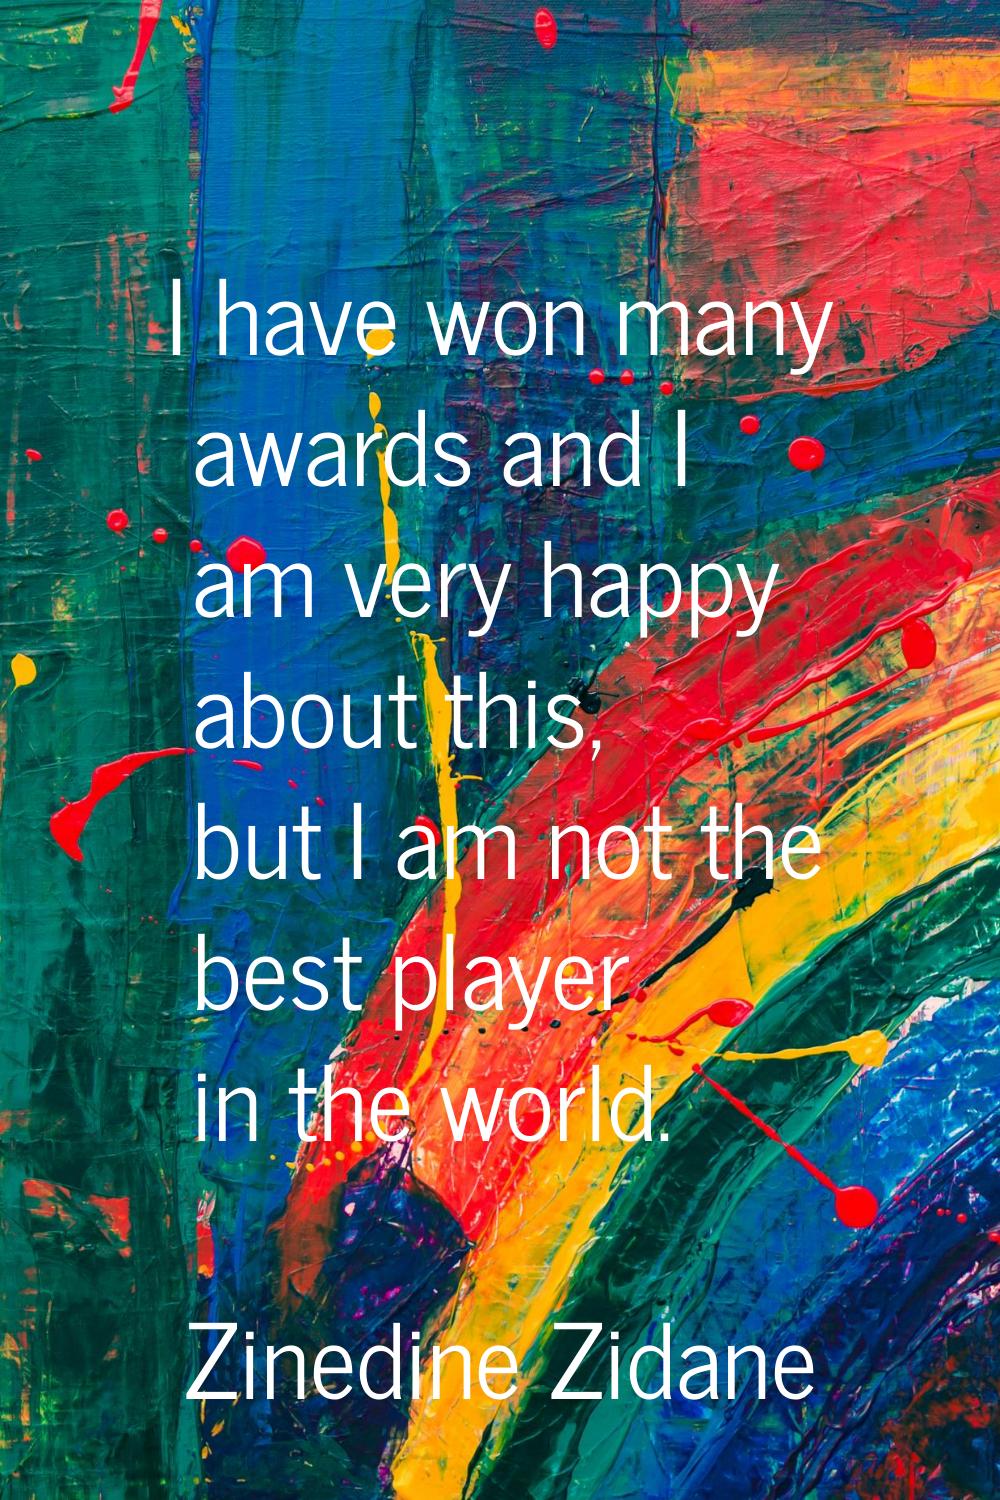 I have won many awards and I am very happy about this, but I am not the best player in the world.